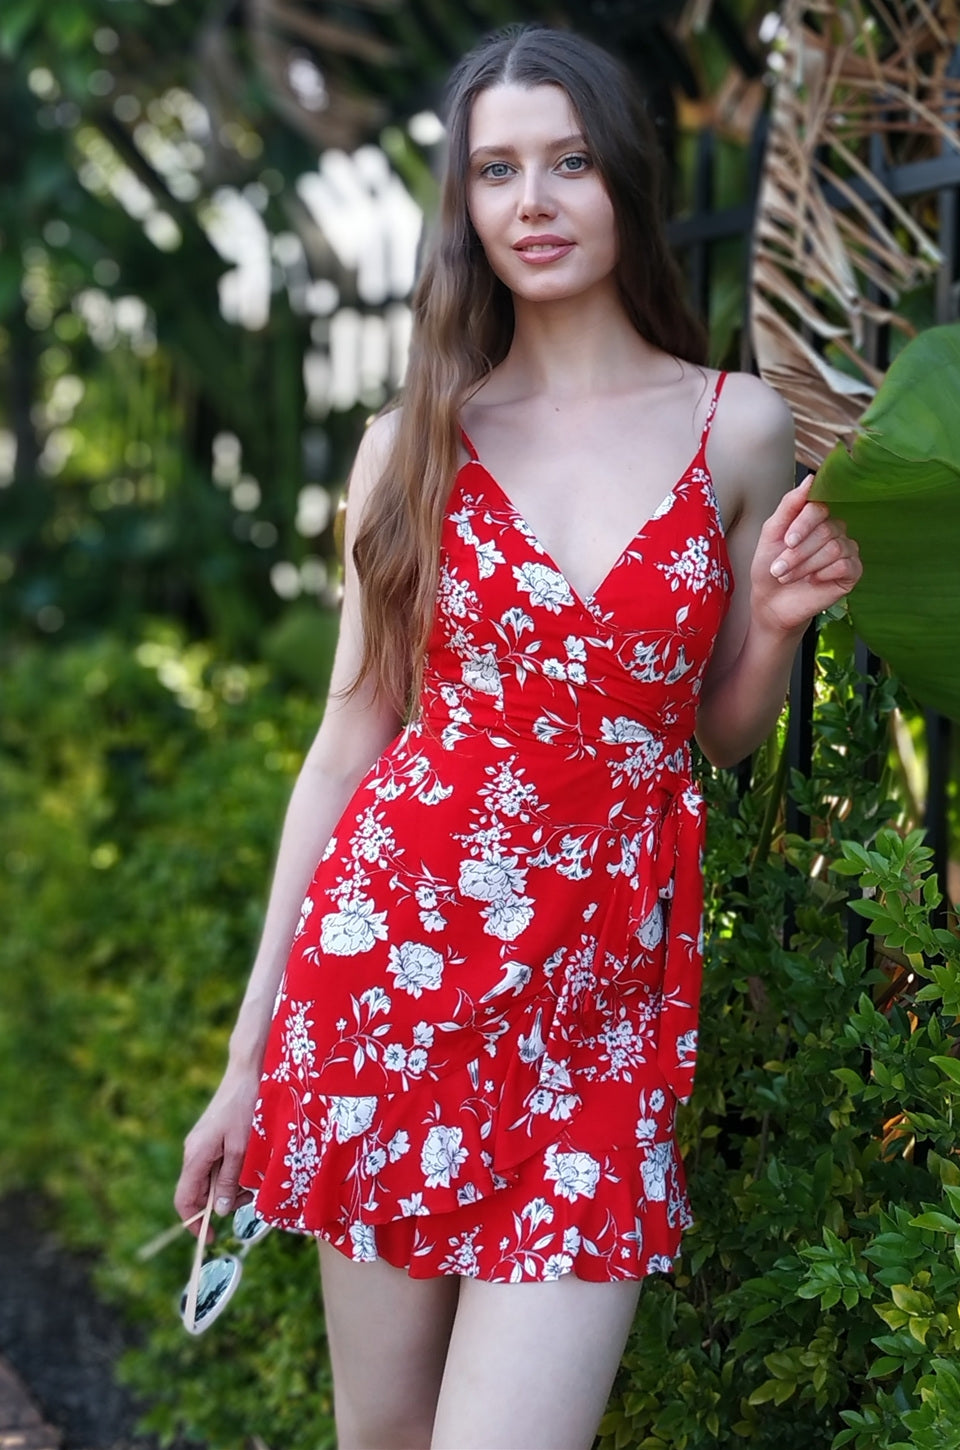 MISS PINKI Ariana Floral Dress In Red